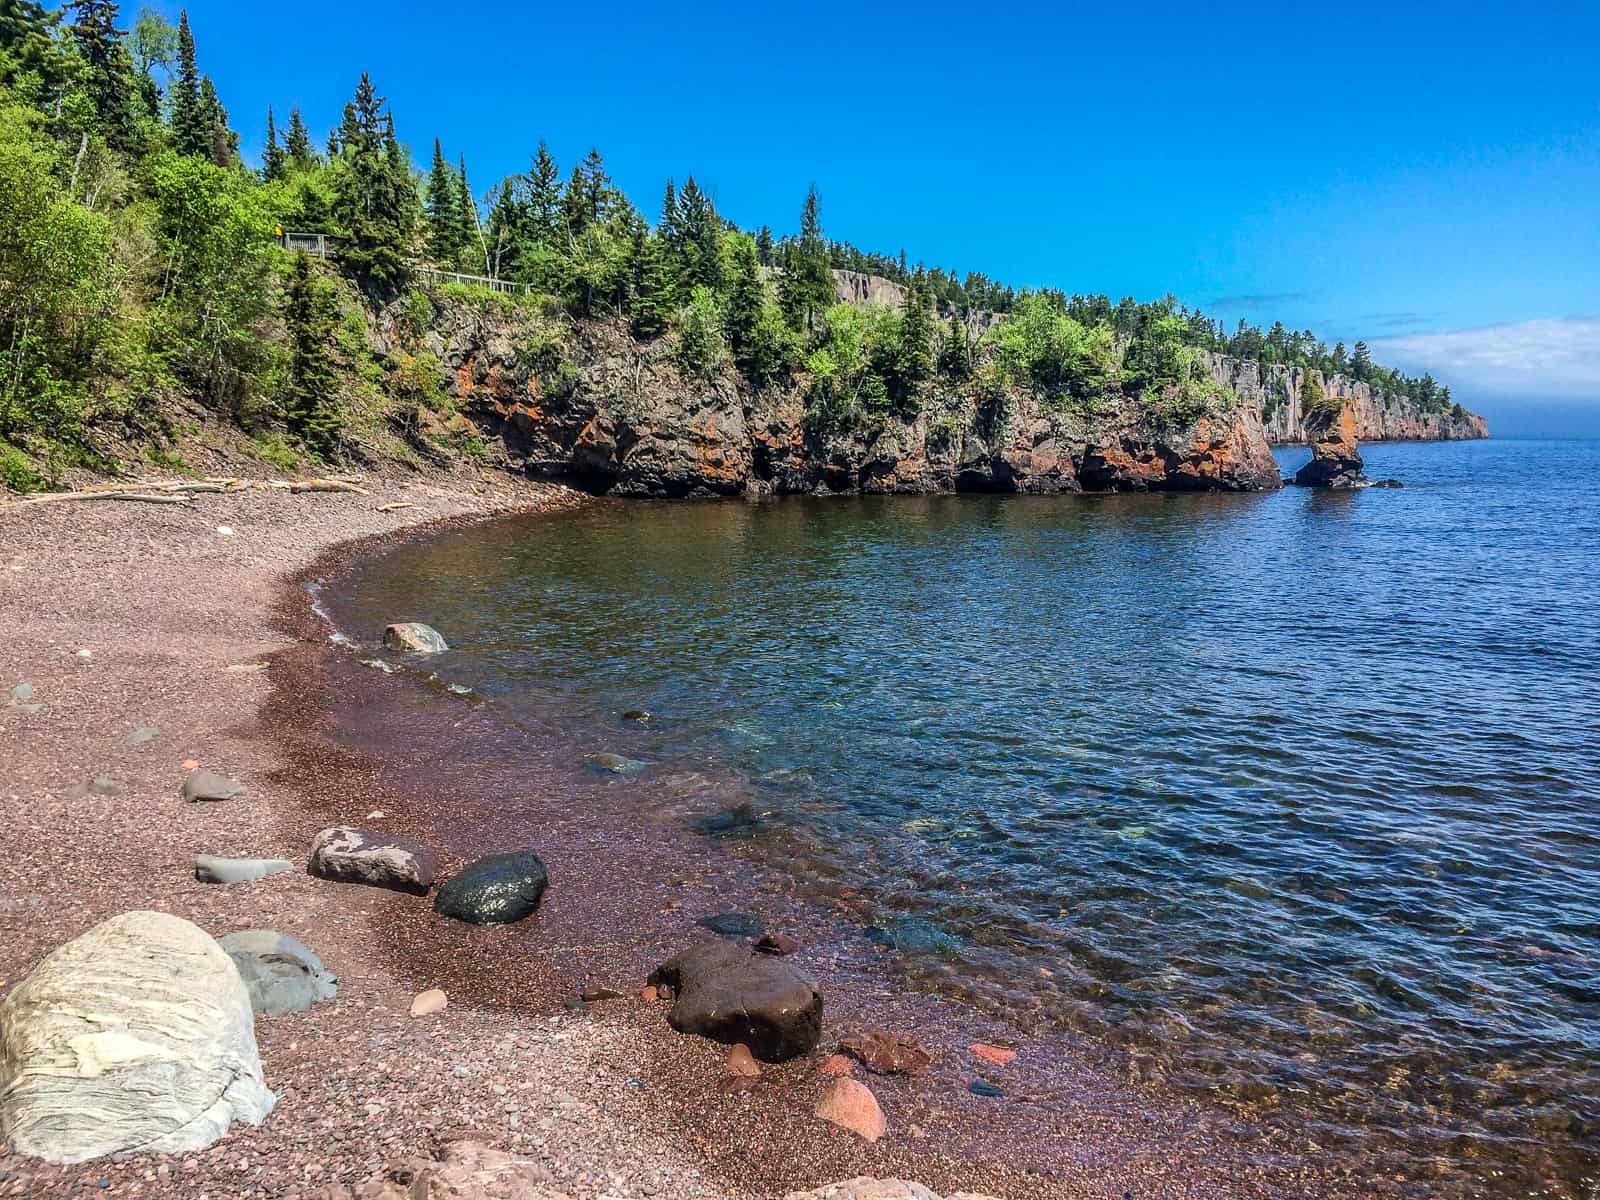 After the Sea Arch Fell at Tettegouche State Park